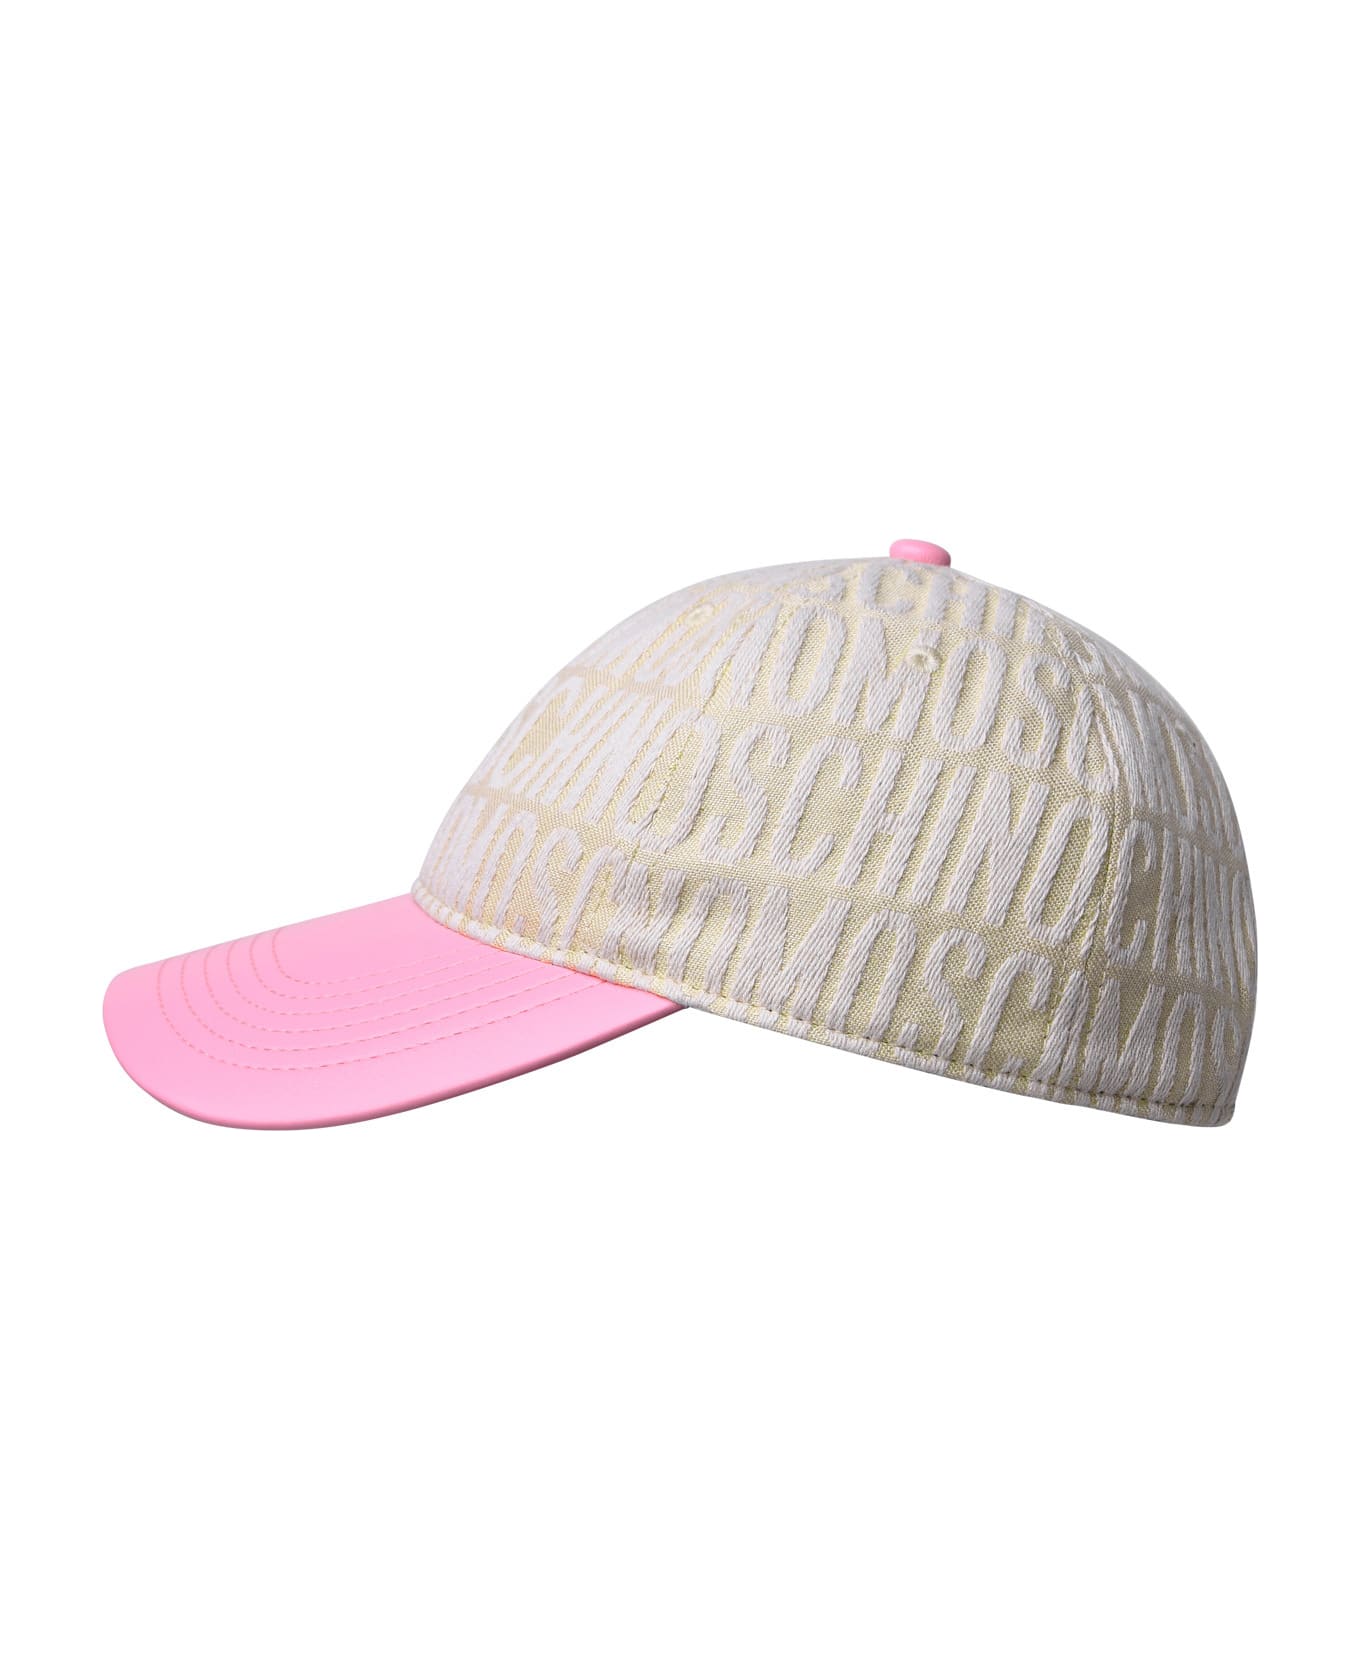 Moschino Hat In Ivory Cotton Blend - Ivory